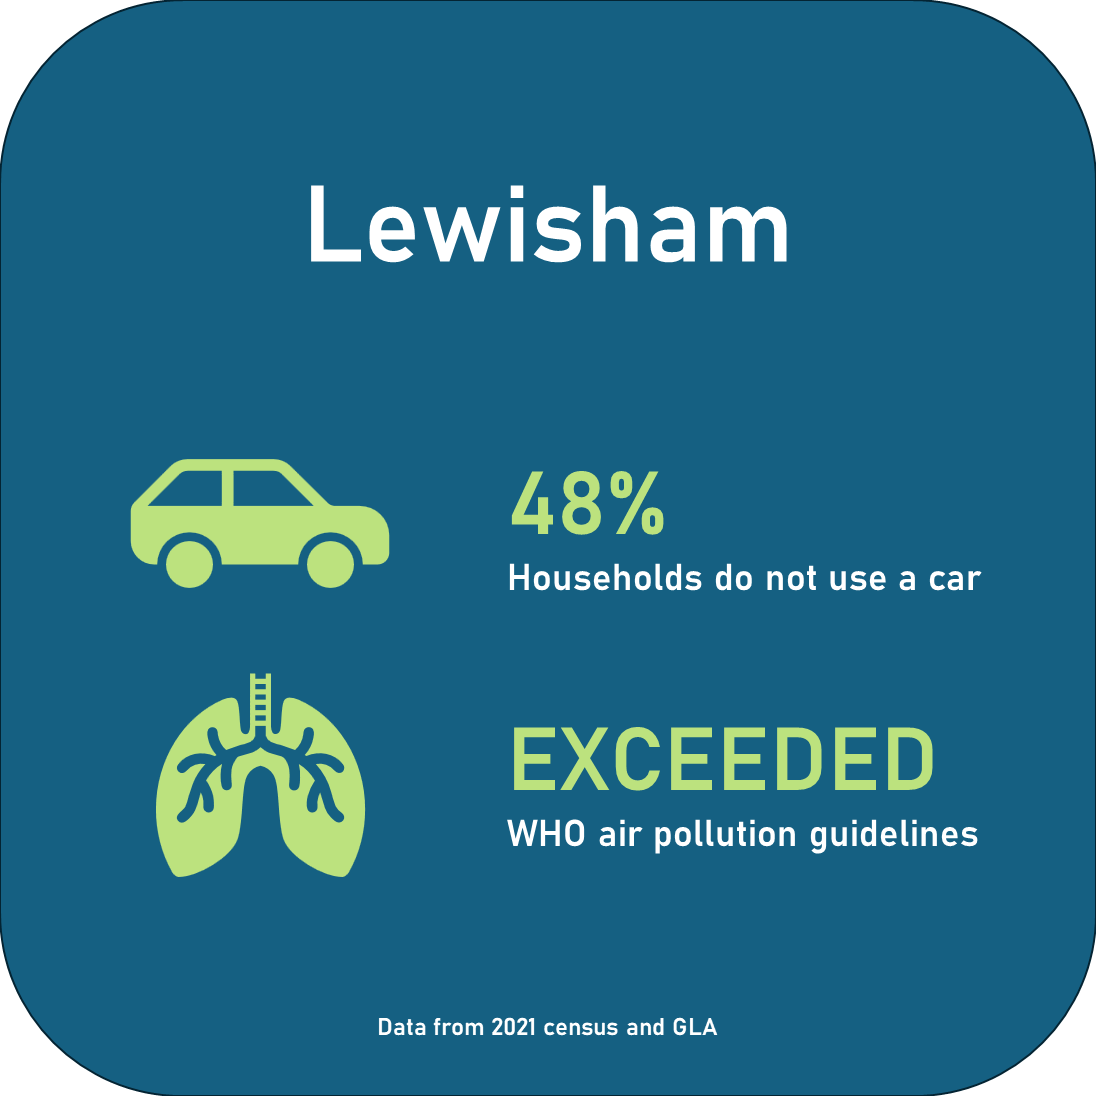 48% households do not use a car. Exceeded WHO air pollution guidelines.